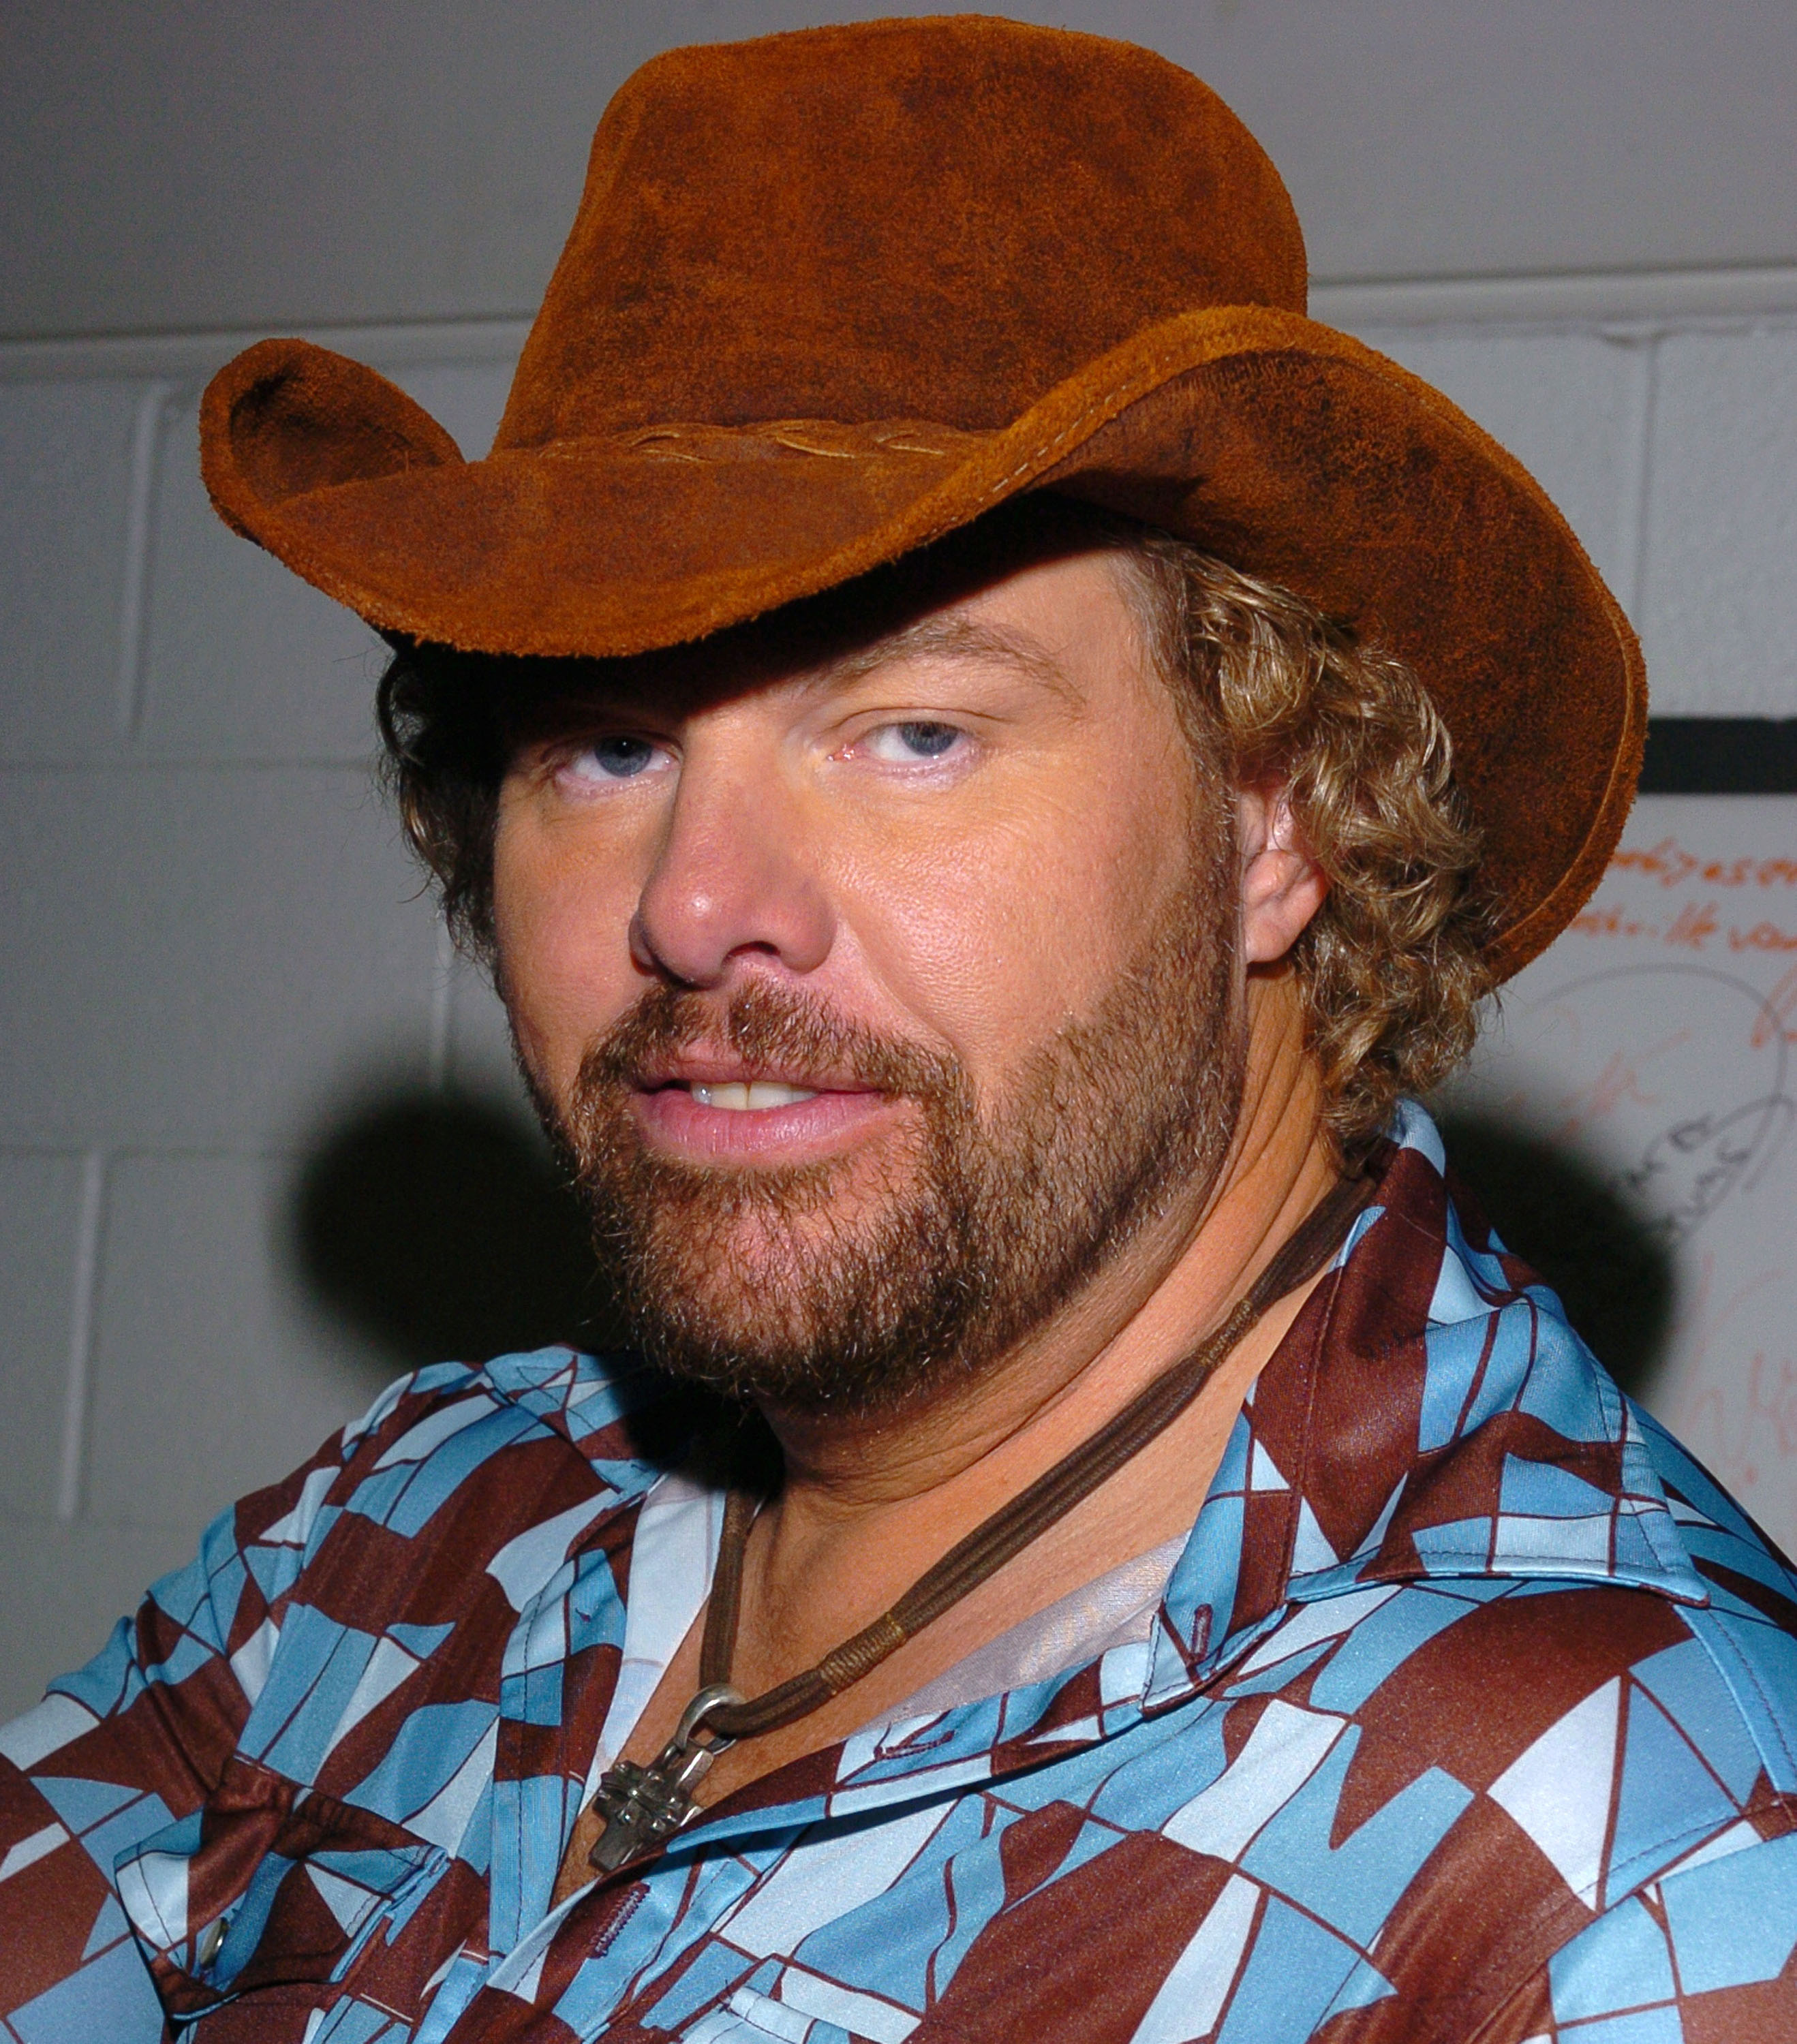 Toby Keith during the CMT Music Awards in Nashville, Tennessee on April 11, 2005 | Source: Getty Images